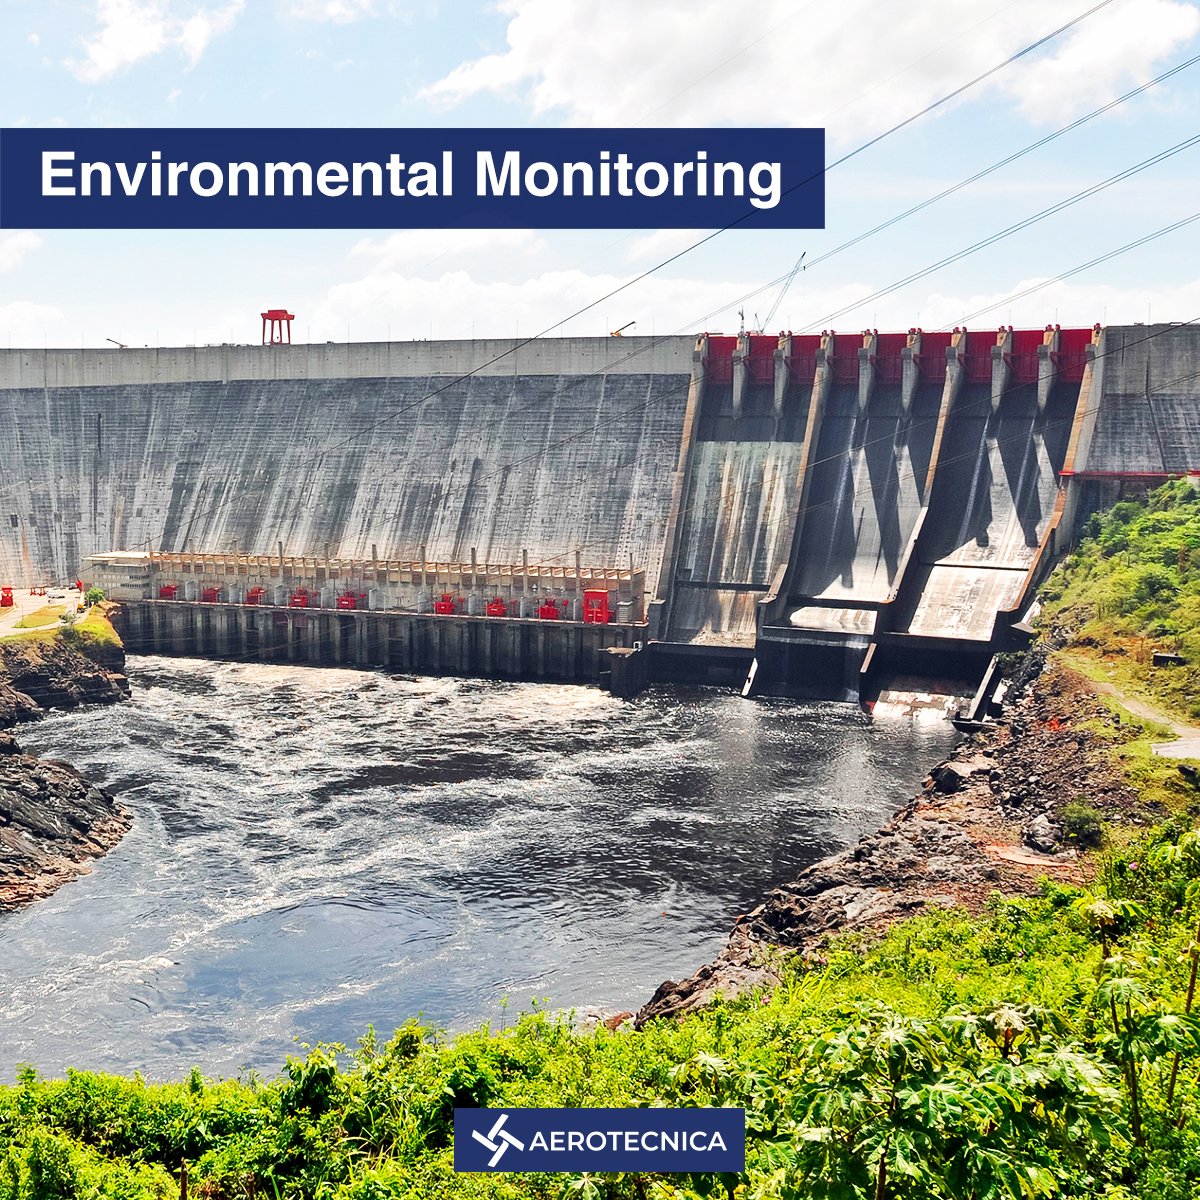 In Aerotecnica, we are #environmentallyresponsible.
Our services cover surveillance and supervision of hydrographic river basins and other areas where operations are open to risks of flooding, landslides, pollution, and spills. 
#Aerotecnica #AviationServices
#greenmatter